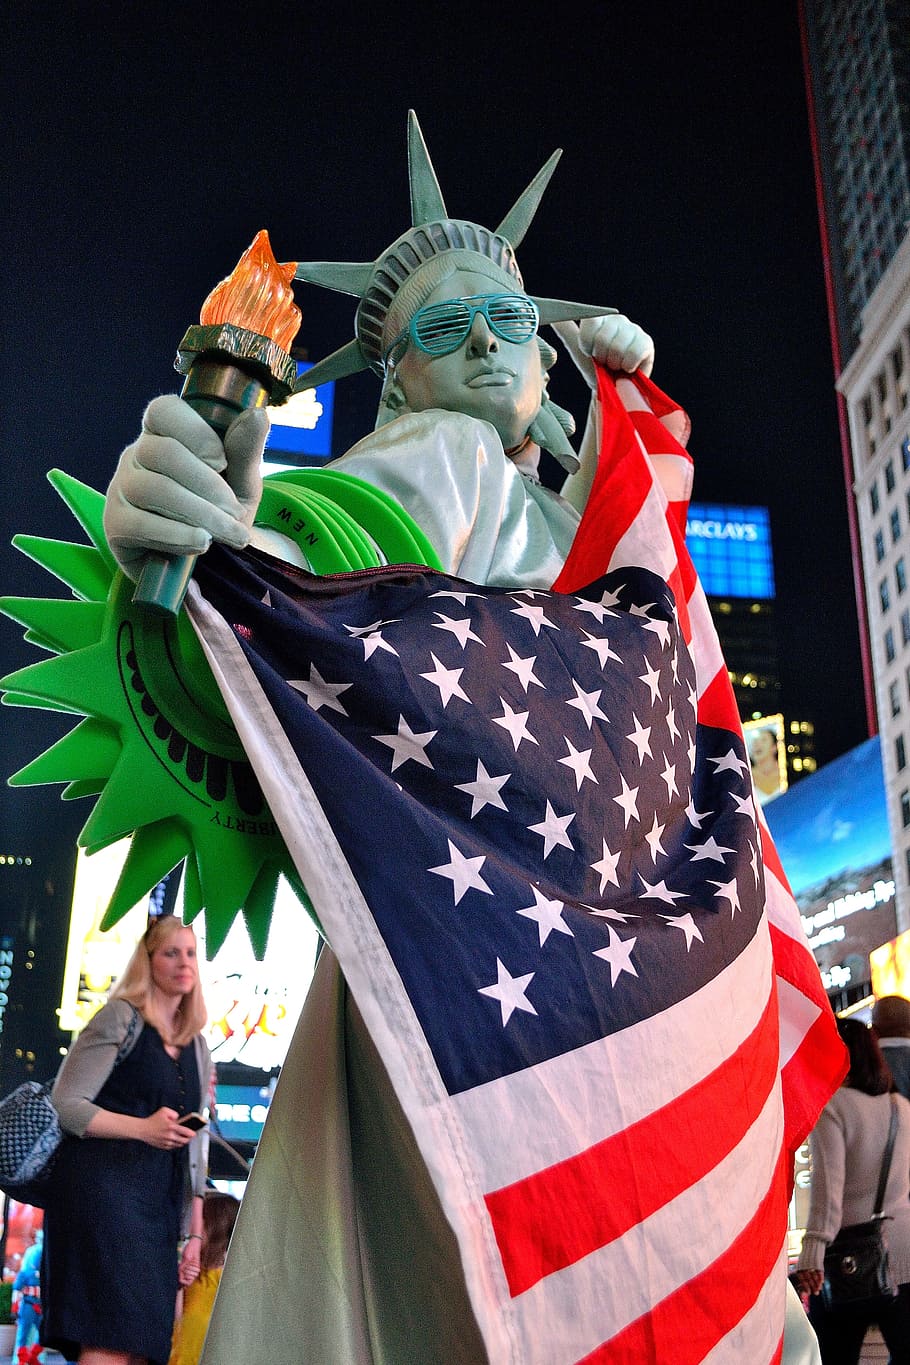 times square, costume, make-up, mime, character, 42nd street, american flag, monumental, liberty, 4th of july